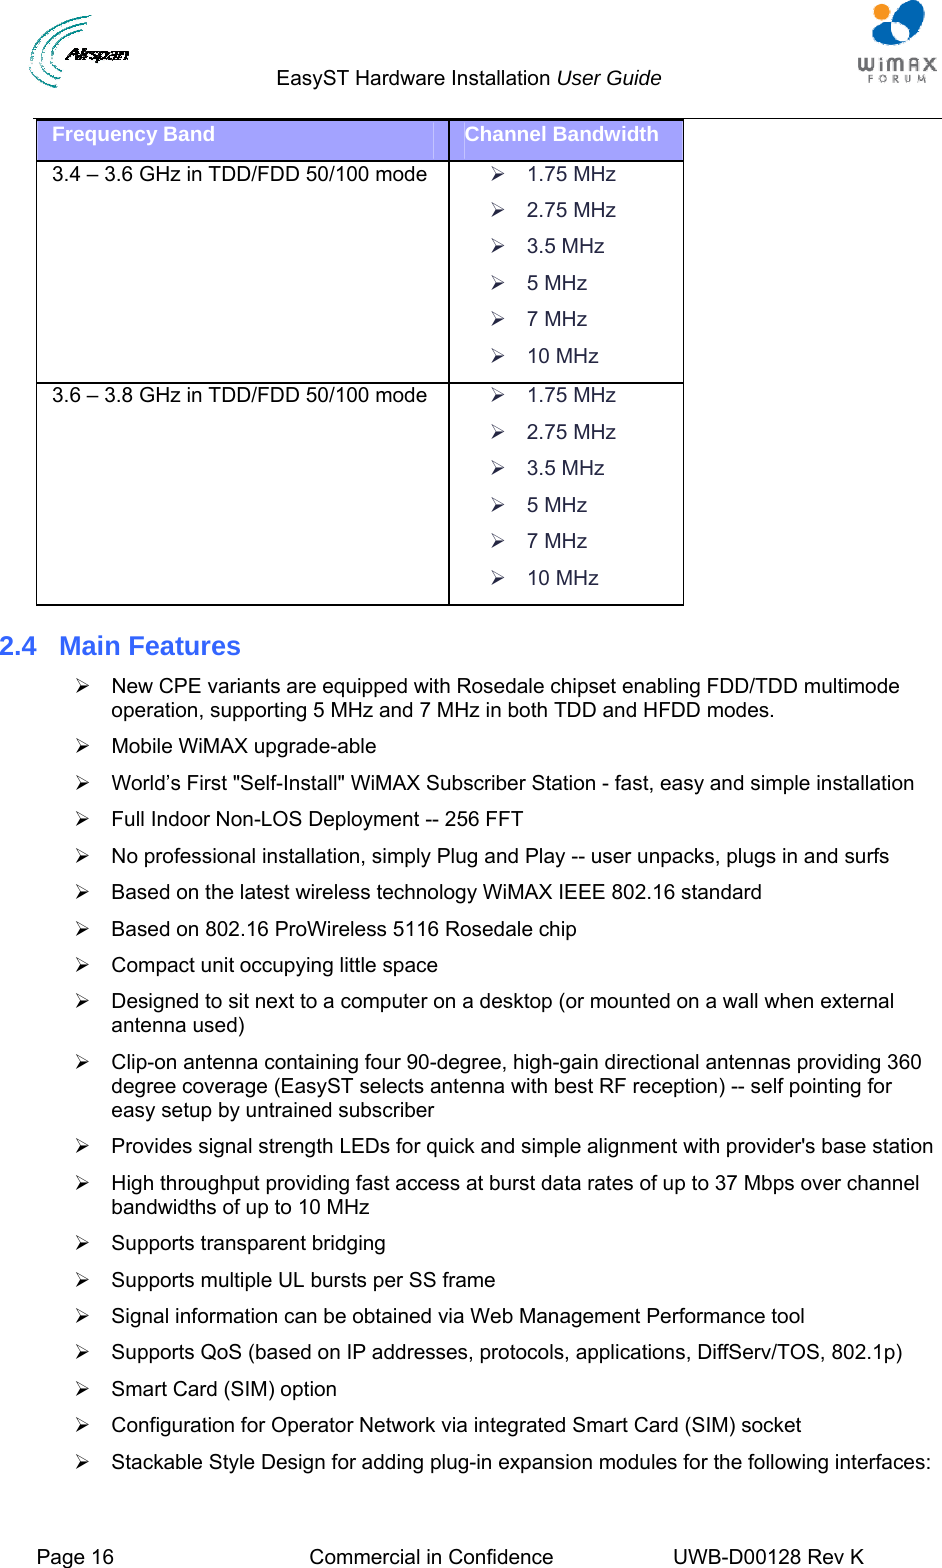                                  EasyST Hardware Installation User Guide  Page 16  Commercial in Confidence  UWB-D00128 Rev K   Frequency Band  Channel Bandwidth 3.4 – 3.6 GHz in TDD/FDD 50/100 mode  ¾ 1.75 MHz ¾ 2.75 MHz ¾ 3.5 MHz ¾ 5 MHz ¾ 7 MHz ¾ 10 MHz 3.6 – 3.8 GHz in TDD/FDD 50/100 mode  ¾ 1.75 MHz ¾ 2.75 MHz ¾ 3.5 MHz ¾ 5 MHz ¾ 7 MHz ¾ 10 MHz 2.4  Main Features ¾  New CPE variants are equipped with Rosedale chipset enabling FDD/TDD multimode operation, supporting 5 MHz and 7 MHz in both TDD and HFDD modes. ¾  Mobile WiMAX upgrade-able ¾  World’s First &quot;Self-Install&quot; WiMAX Subscriber Station - fast, easy and simple installation ¾  Full Indoor Non-LOS Deployment -- 256 FFT ¾  No professional installation, simply Plug and Play -- user unpacks, plugs in and surfs ¾  Based on the latest wireless technology WiMAX IEEE 802.16 standard ¾  Based on 802.16 ProWireless 5116 Rosedale chip  ¾  Compact unit occupying little space ¾  Designed to sit next to a computer on a desktop (or mounted on a wall when external antenna used) ¾  Clip-on antenna containing four 90-degree, high-gain directional antennas providing 360 degree coverage (EasyST selects antenna with best RF reception) -- self pointing for easy setup by untrained subscriber ¾  Provides signal strength LEDs for quick and simple alignment with provider&apos;s base station ¾  High throughput providing fast access at burst data rates of up to 37 Mbps over channel bandwidths of up to 10 MHz ¾  Supports transparent bridging ¾  Supports multiple UL bursts per SS frame ¾  Signal information can be obtained via Web Management Performance tool ¾  Supports QoS (based on IP addresses, protocols, applications, DiffServ/TOS, 802.1p) ¾  Smart Card (SIM) option ¾  Configuration for Operator Network via integrated Smart Card (SIM) socket ¾  Stackable Style Design for adding plug-in expansion modules for the following interfaces: 